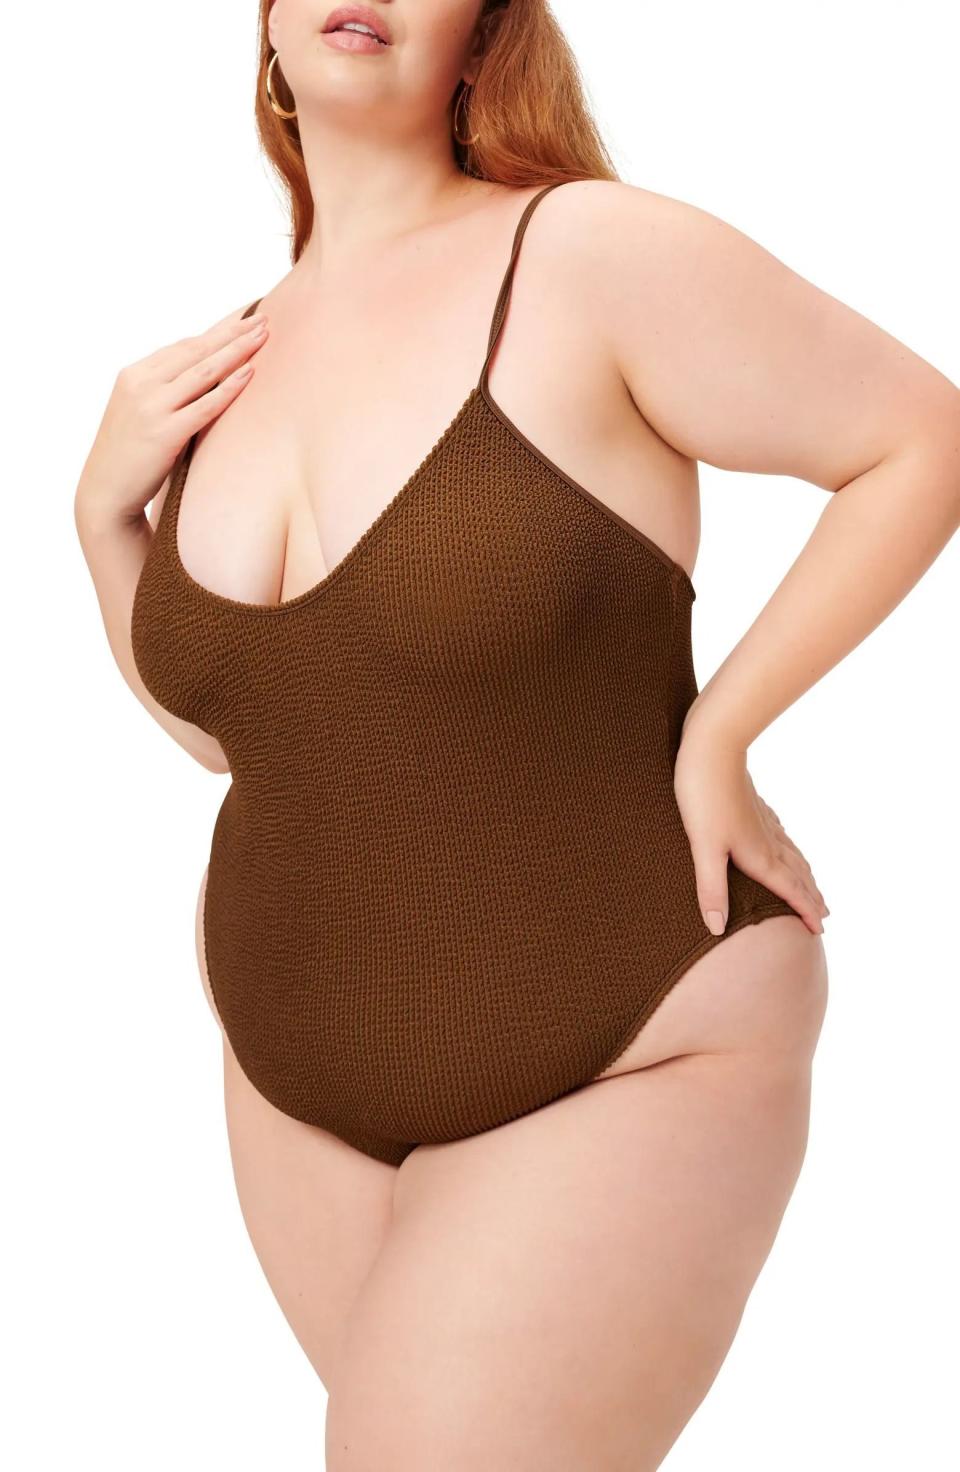 12) Good American Always Fits One-Piece Swimsuit